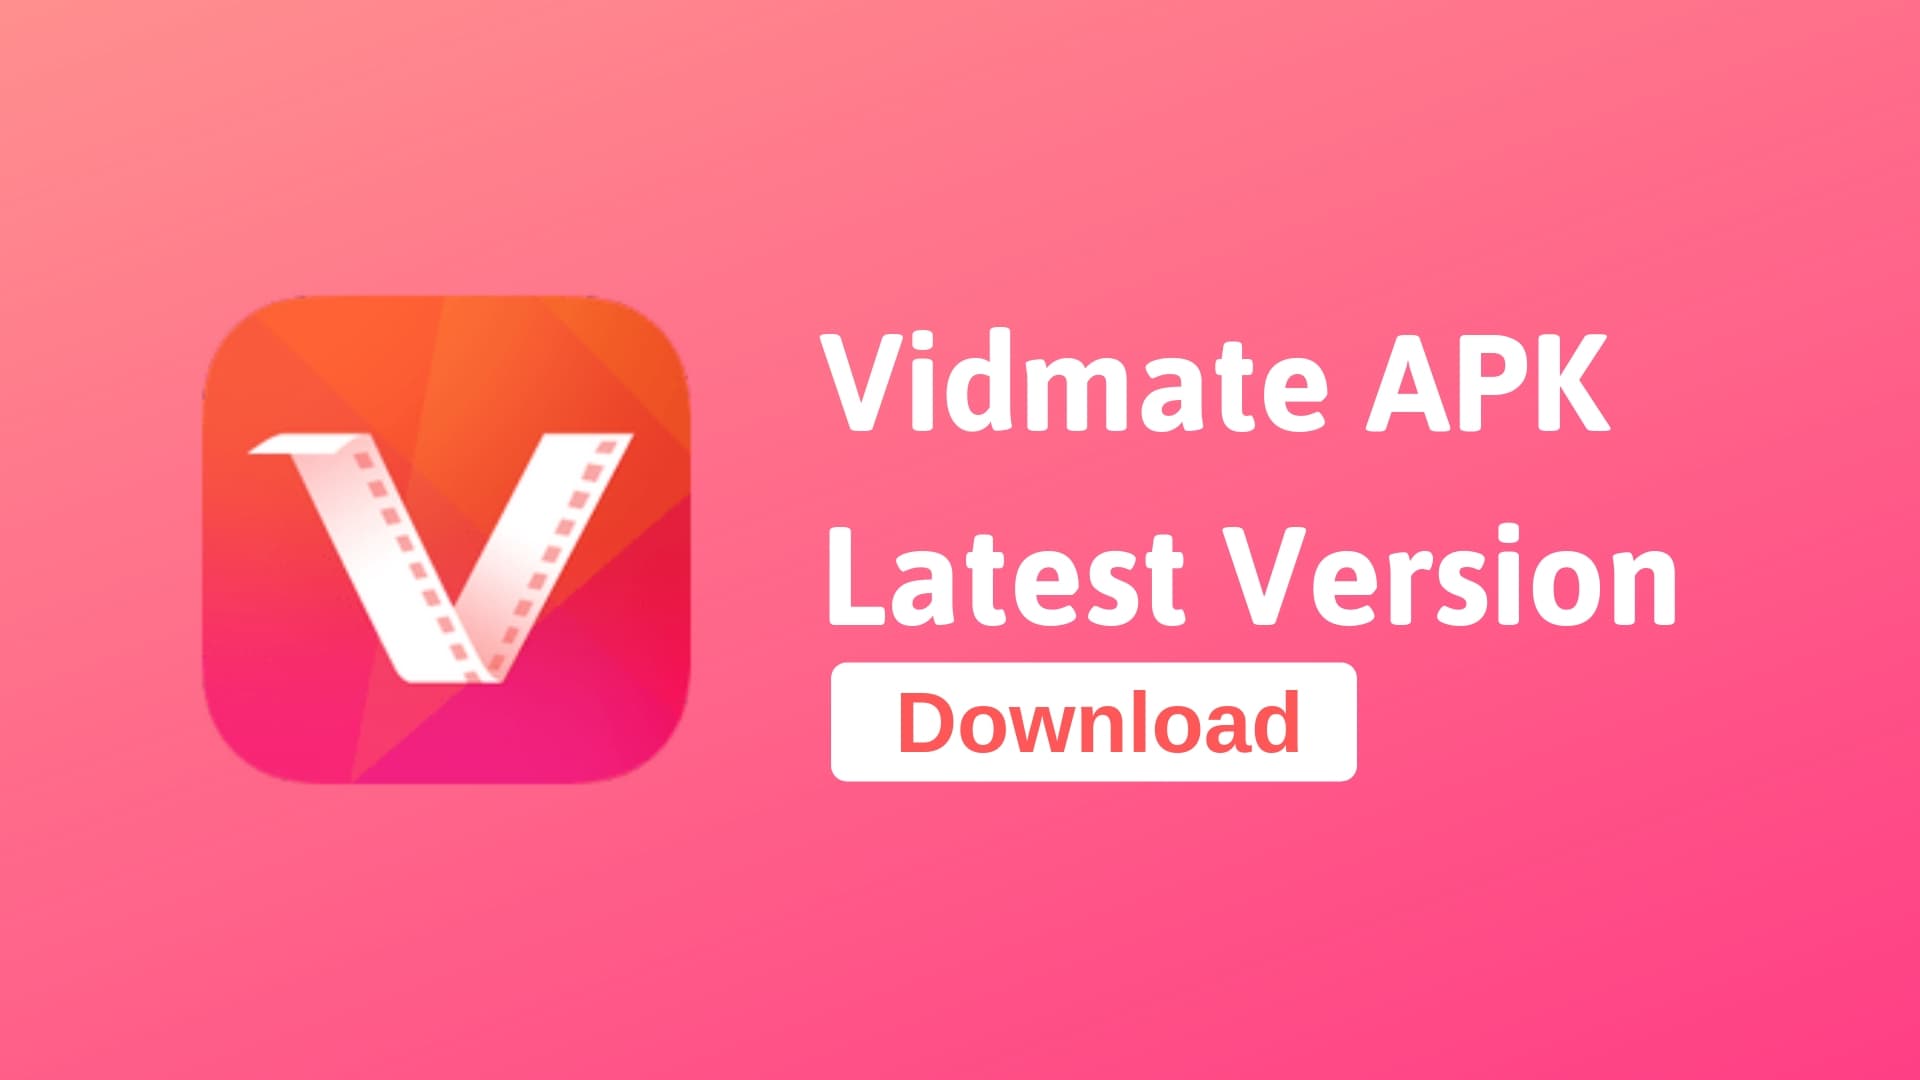 Vidmate Install And Enjoy Watching And Downloading Unlimited Videos